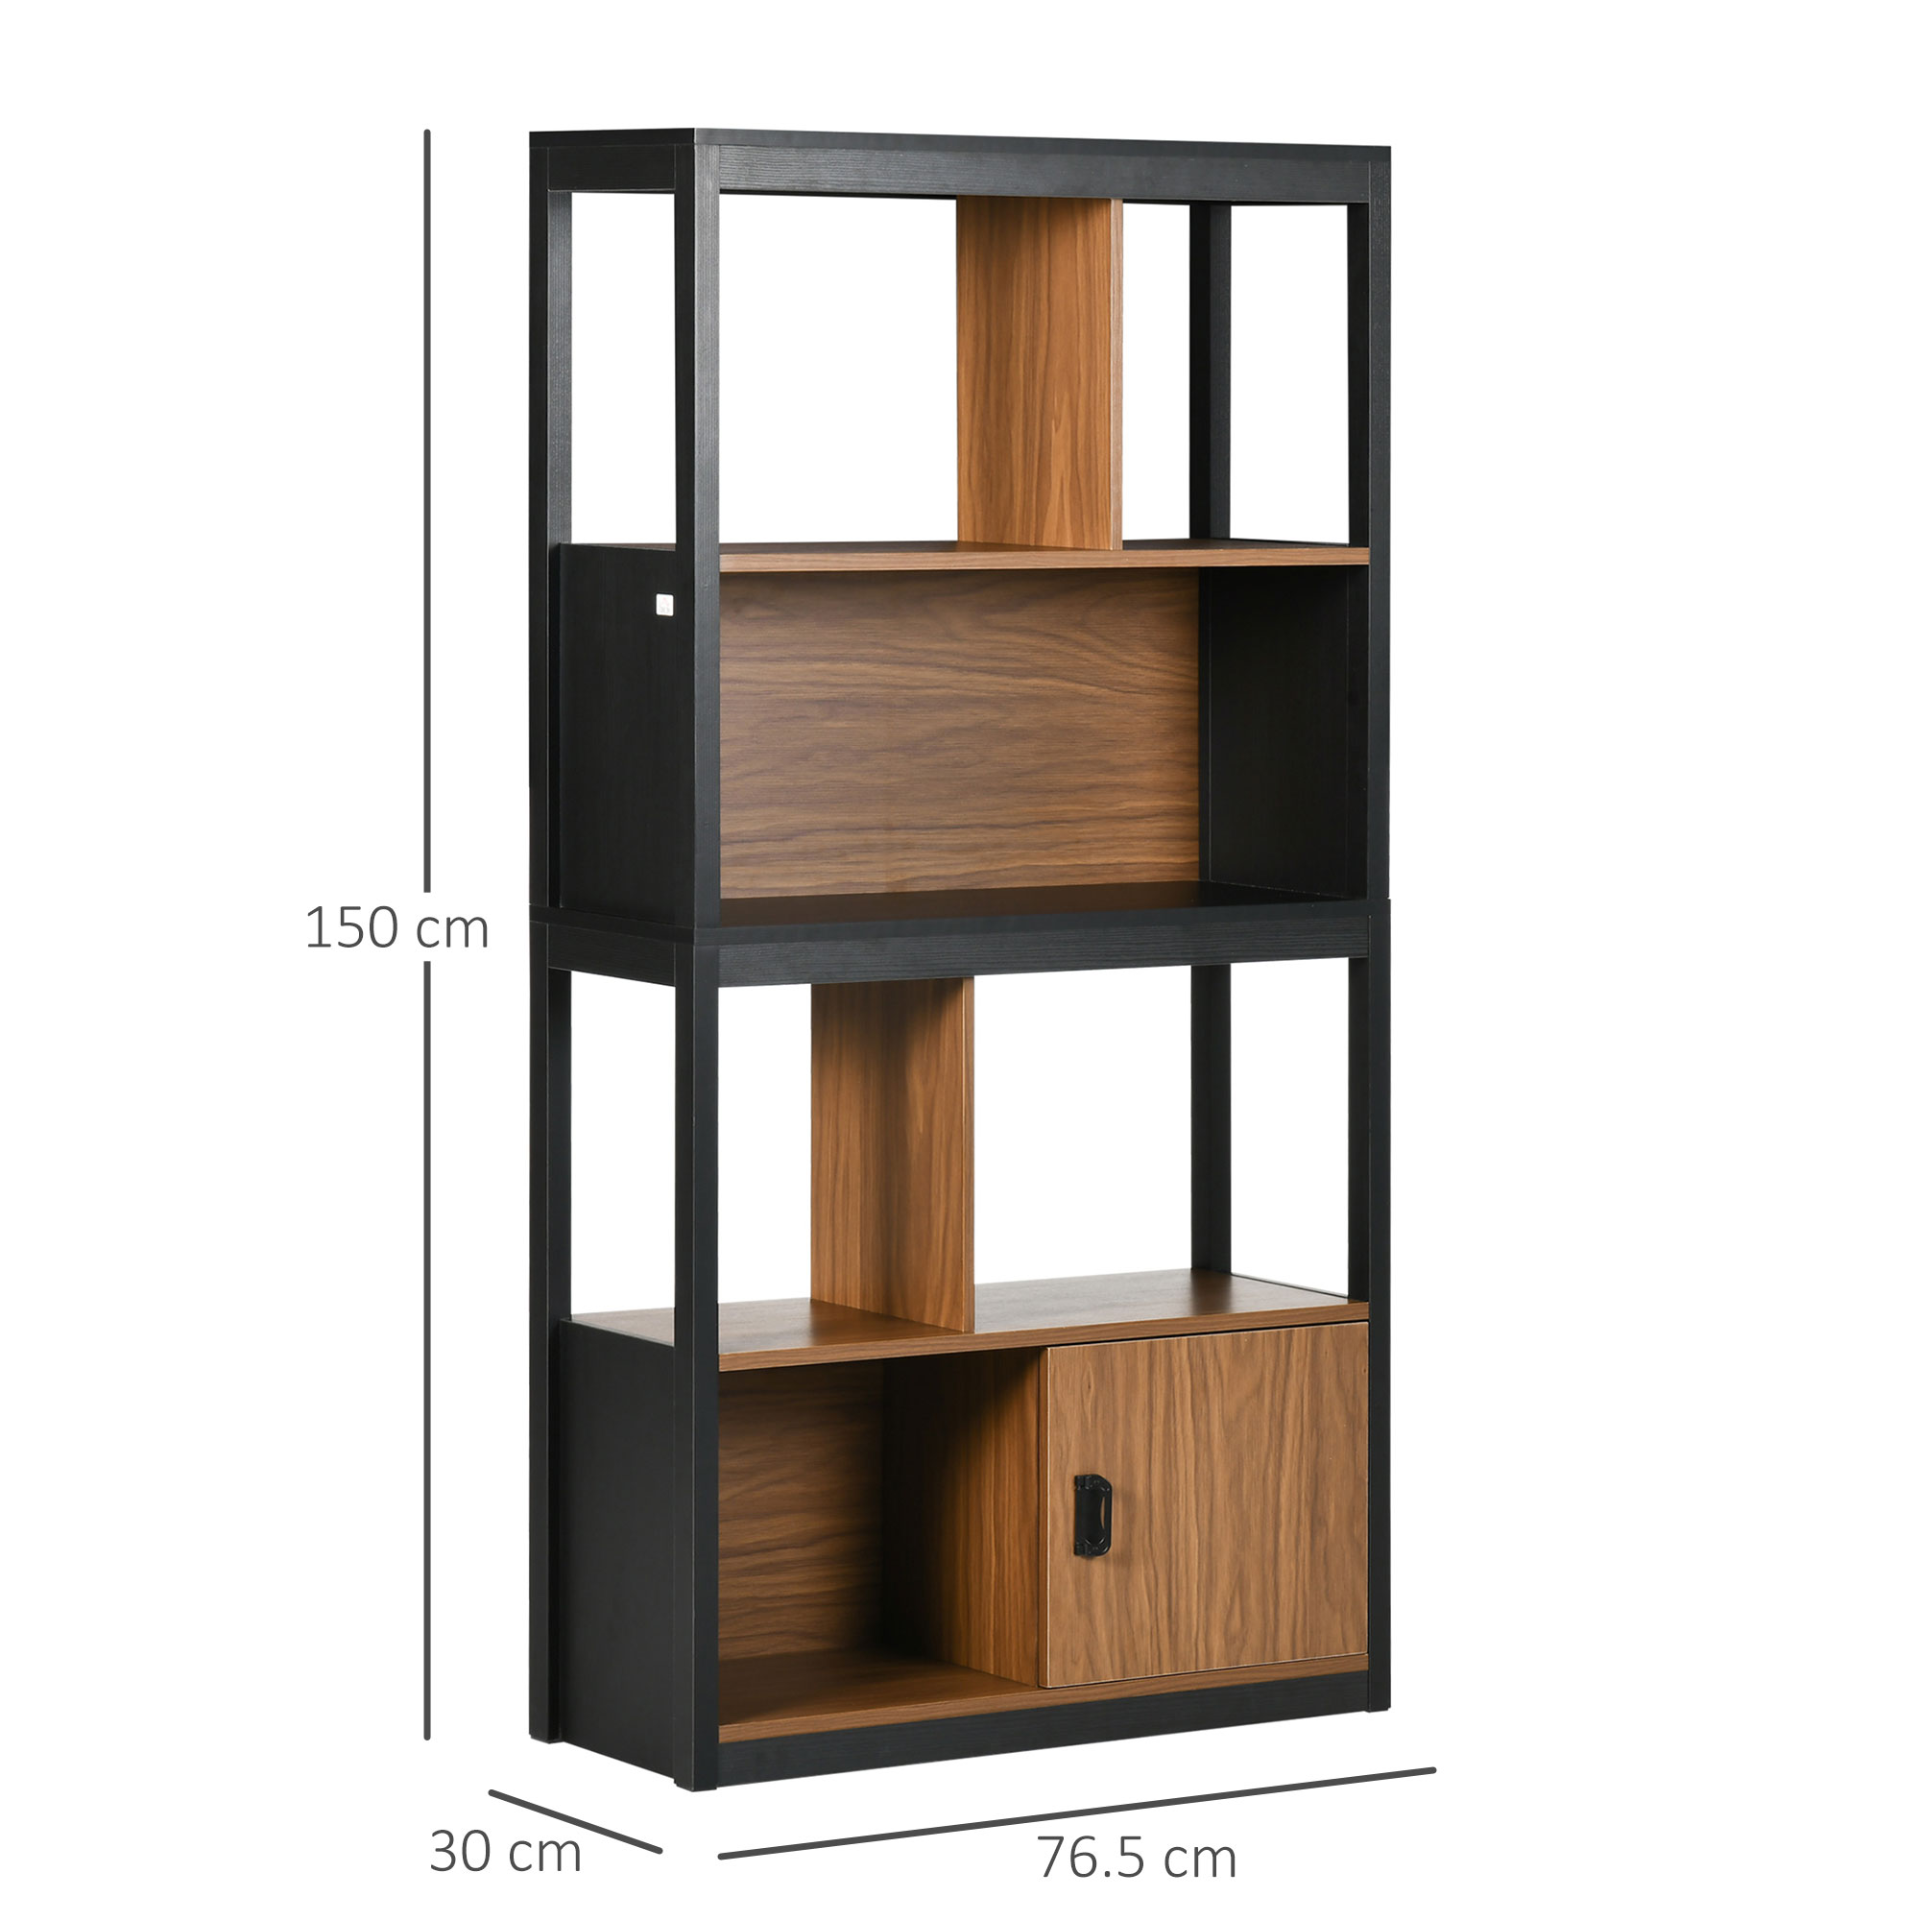 HOMCOM Modern 4-Tier Bookshelf, Freestanding Bookcase with Storage Shelving and Closed Cabinet, for Living Room Home Office Study, Walnut Brown